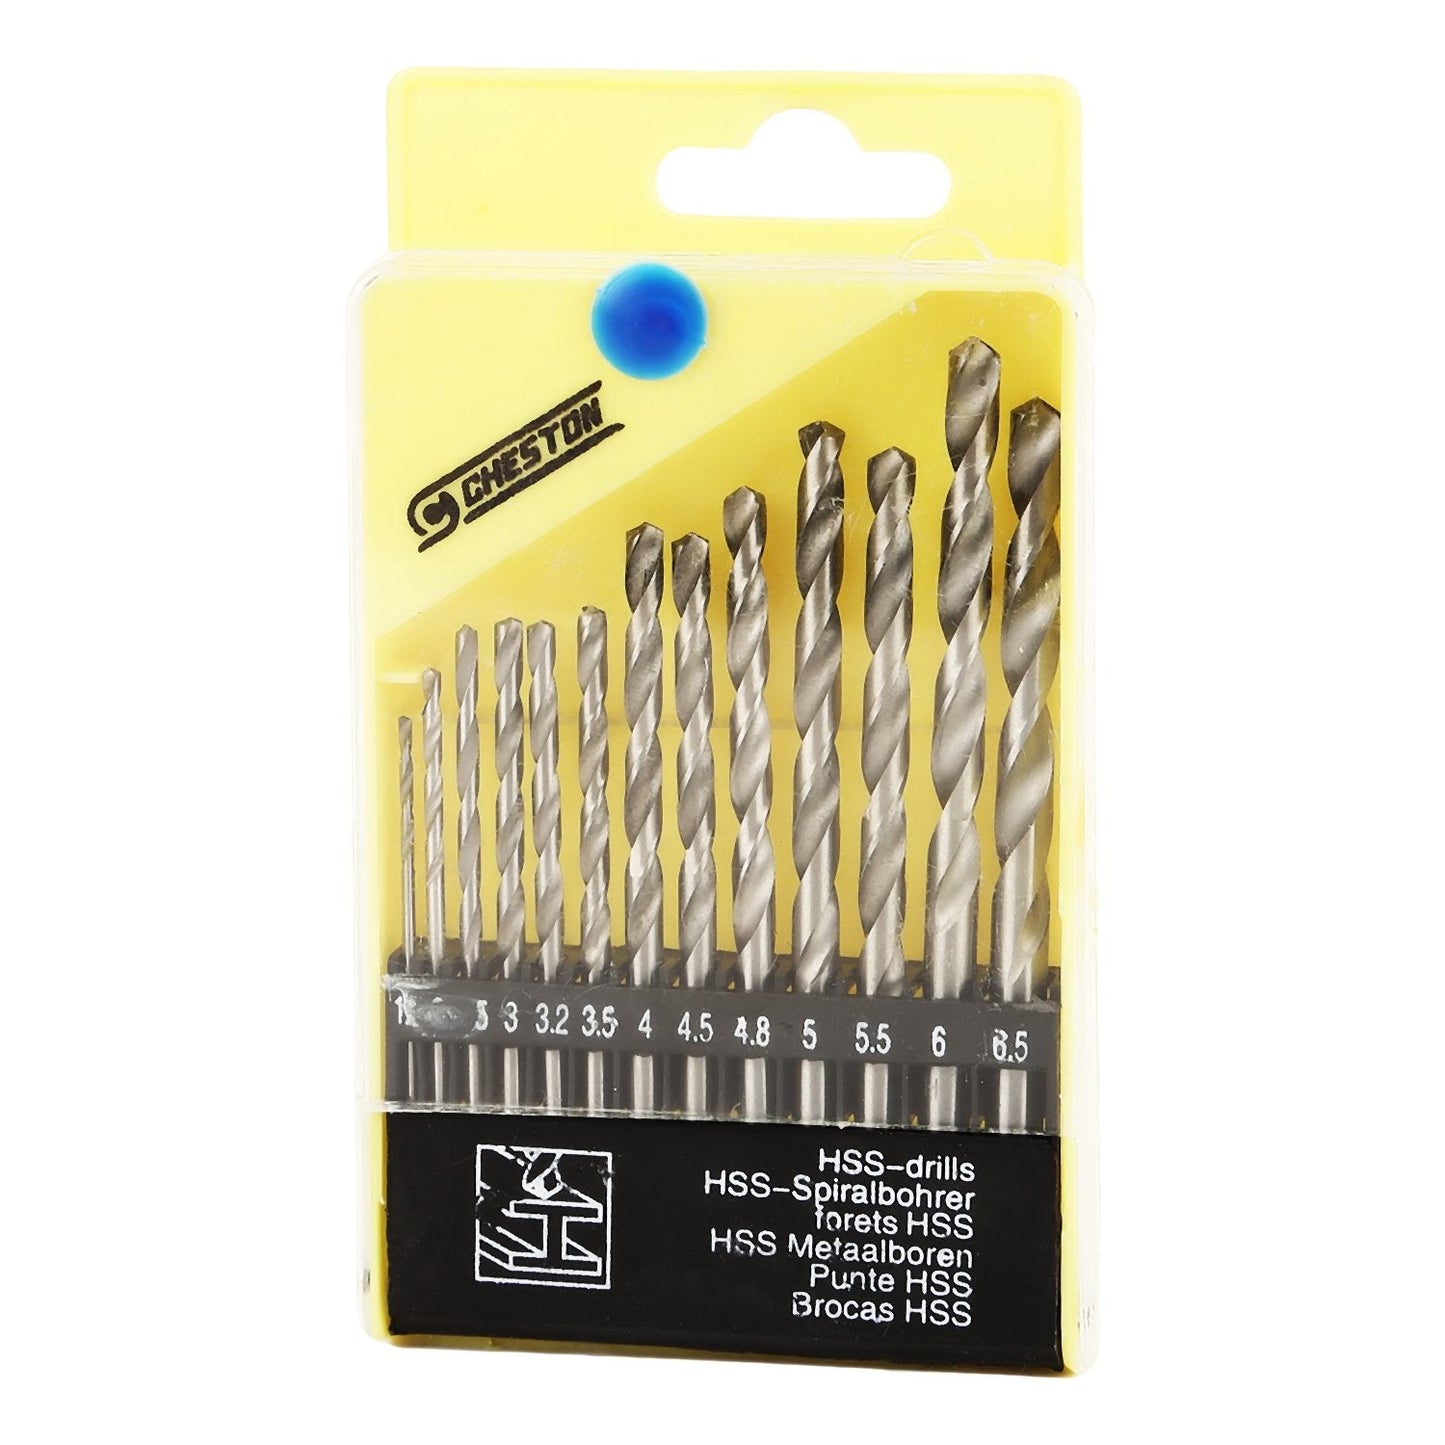 Cheston 13 pc HSS Metal Drill Bit Pack of 1 I Round Shank  Industrial Strength Carbide Tip for Metal Stainless Steel Aluminium  Hard Surface Drilling I 1.5mm-6.5mm Compatible with Bosch BlackDecker Ibell Drill